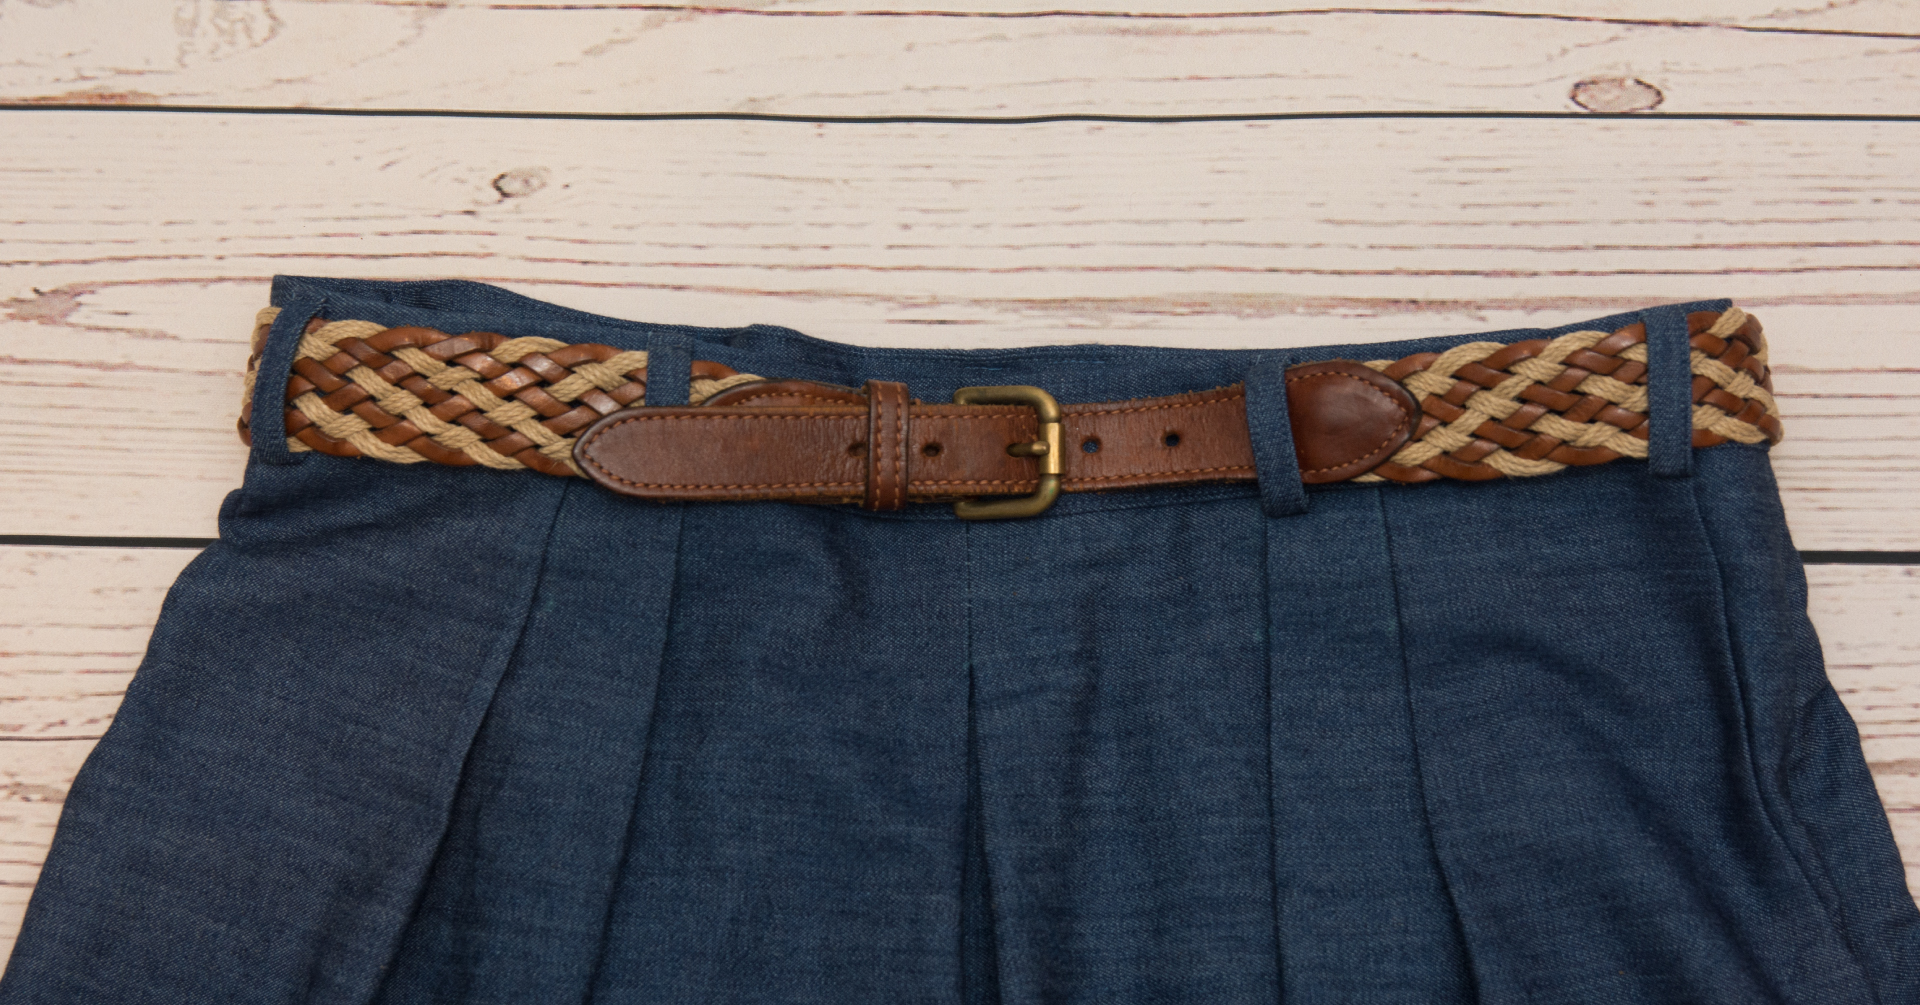 How to Add Belt Loops, Blog